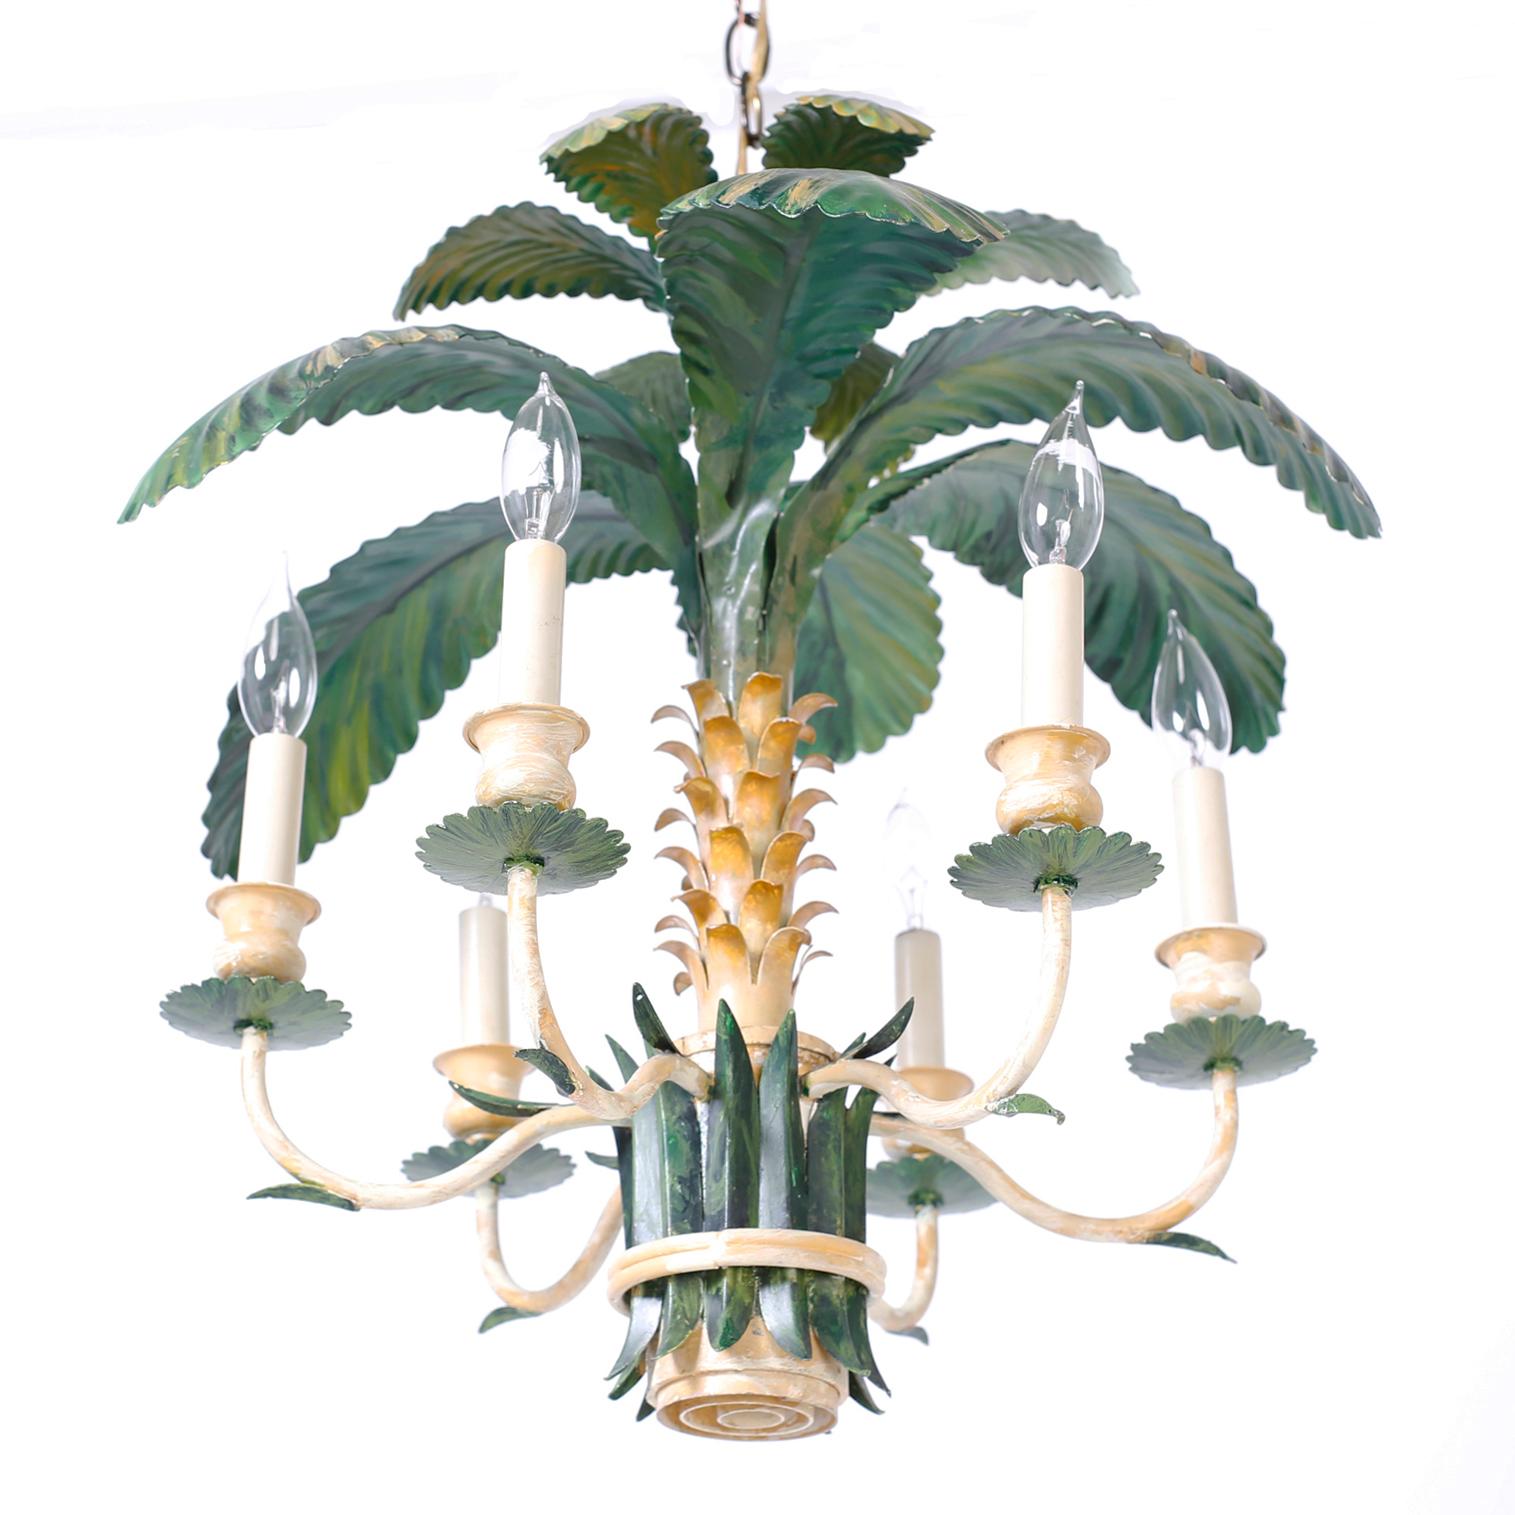 Hand-Painted Painted Tole Palm Tree Chandelier